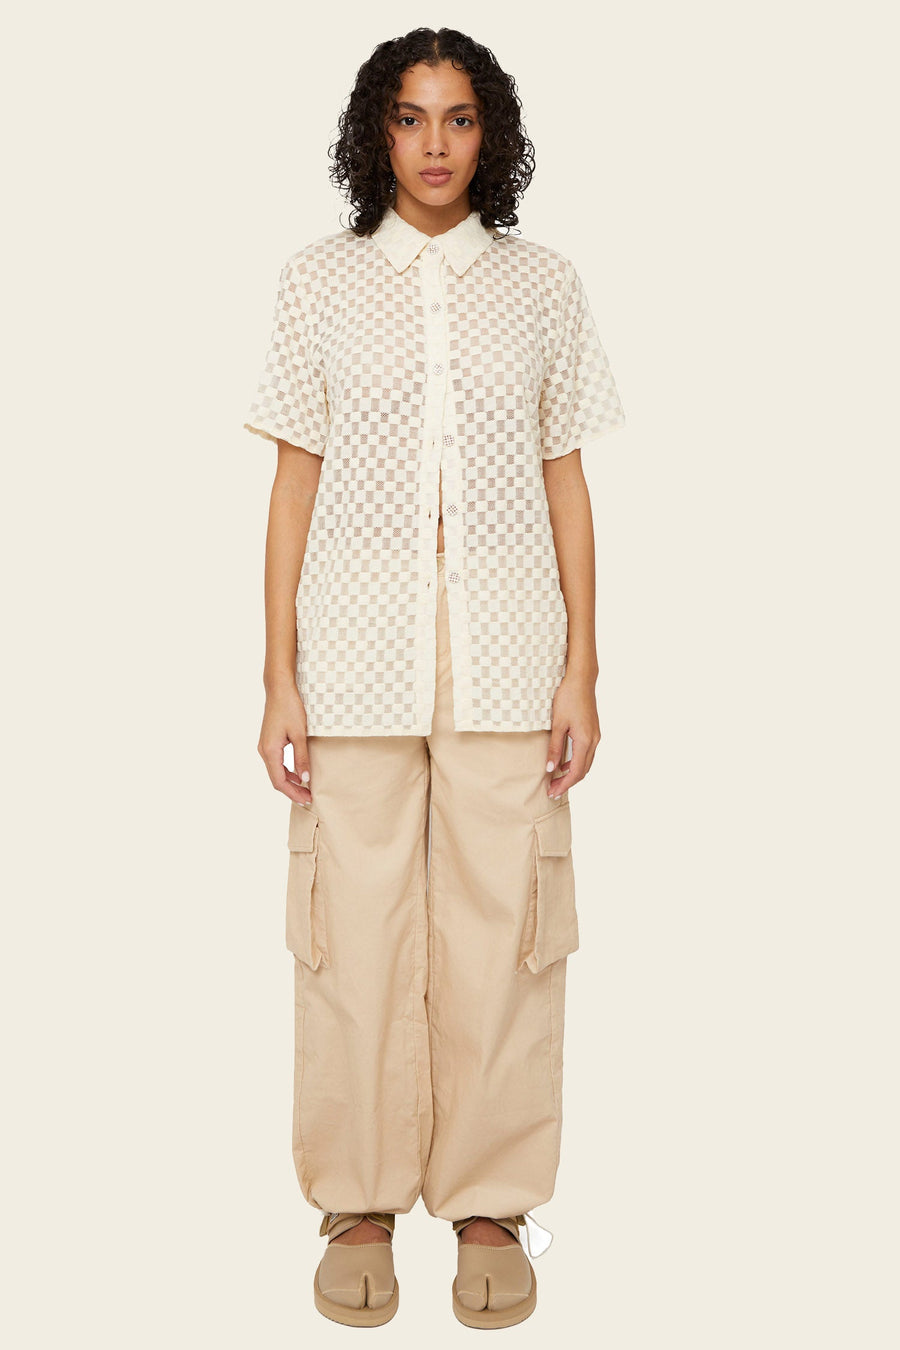 Find Me Now Harmony Mesh Checkered Button Down | White Noise